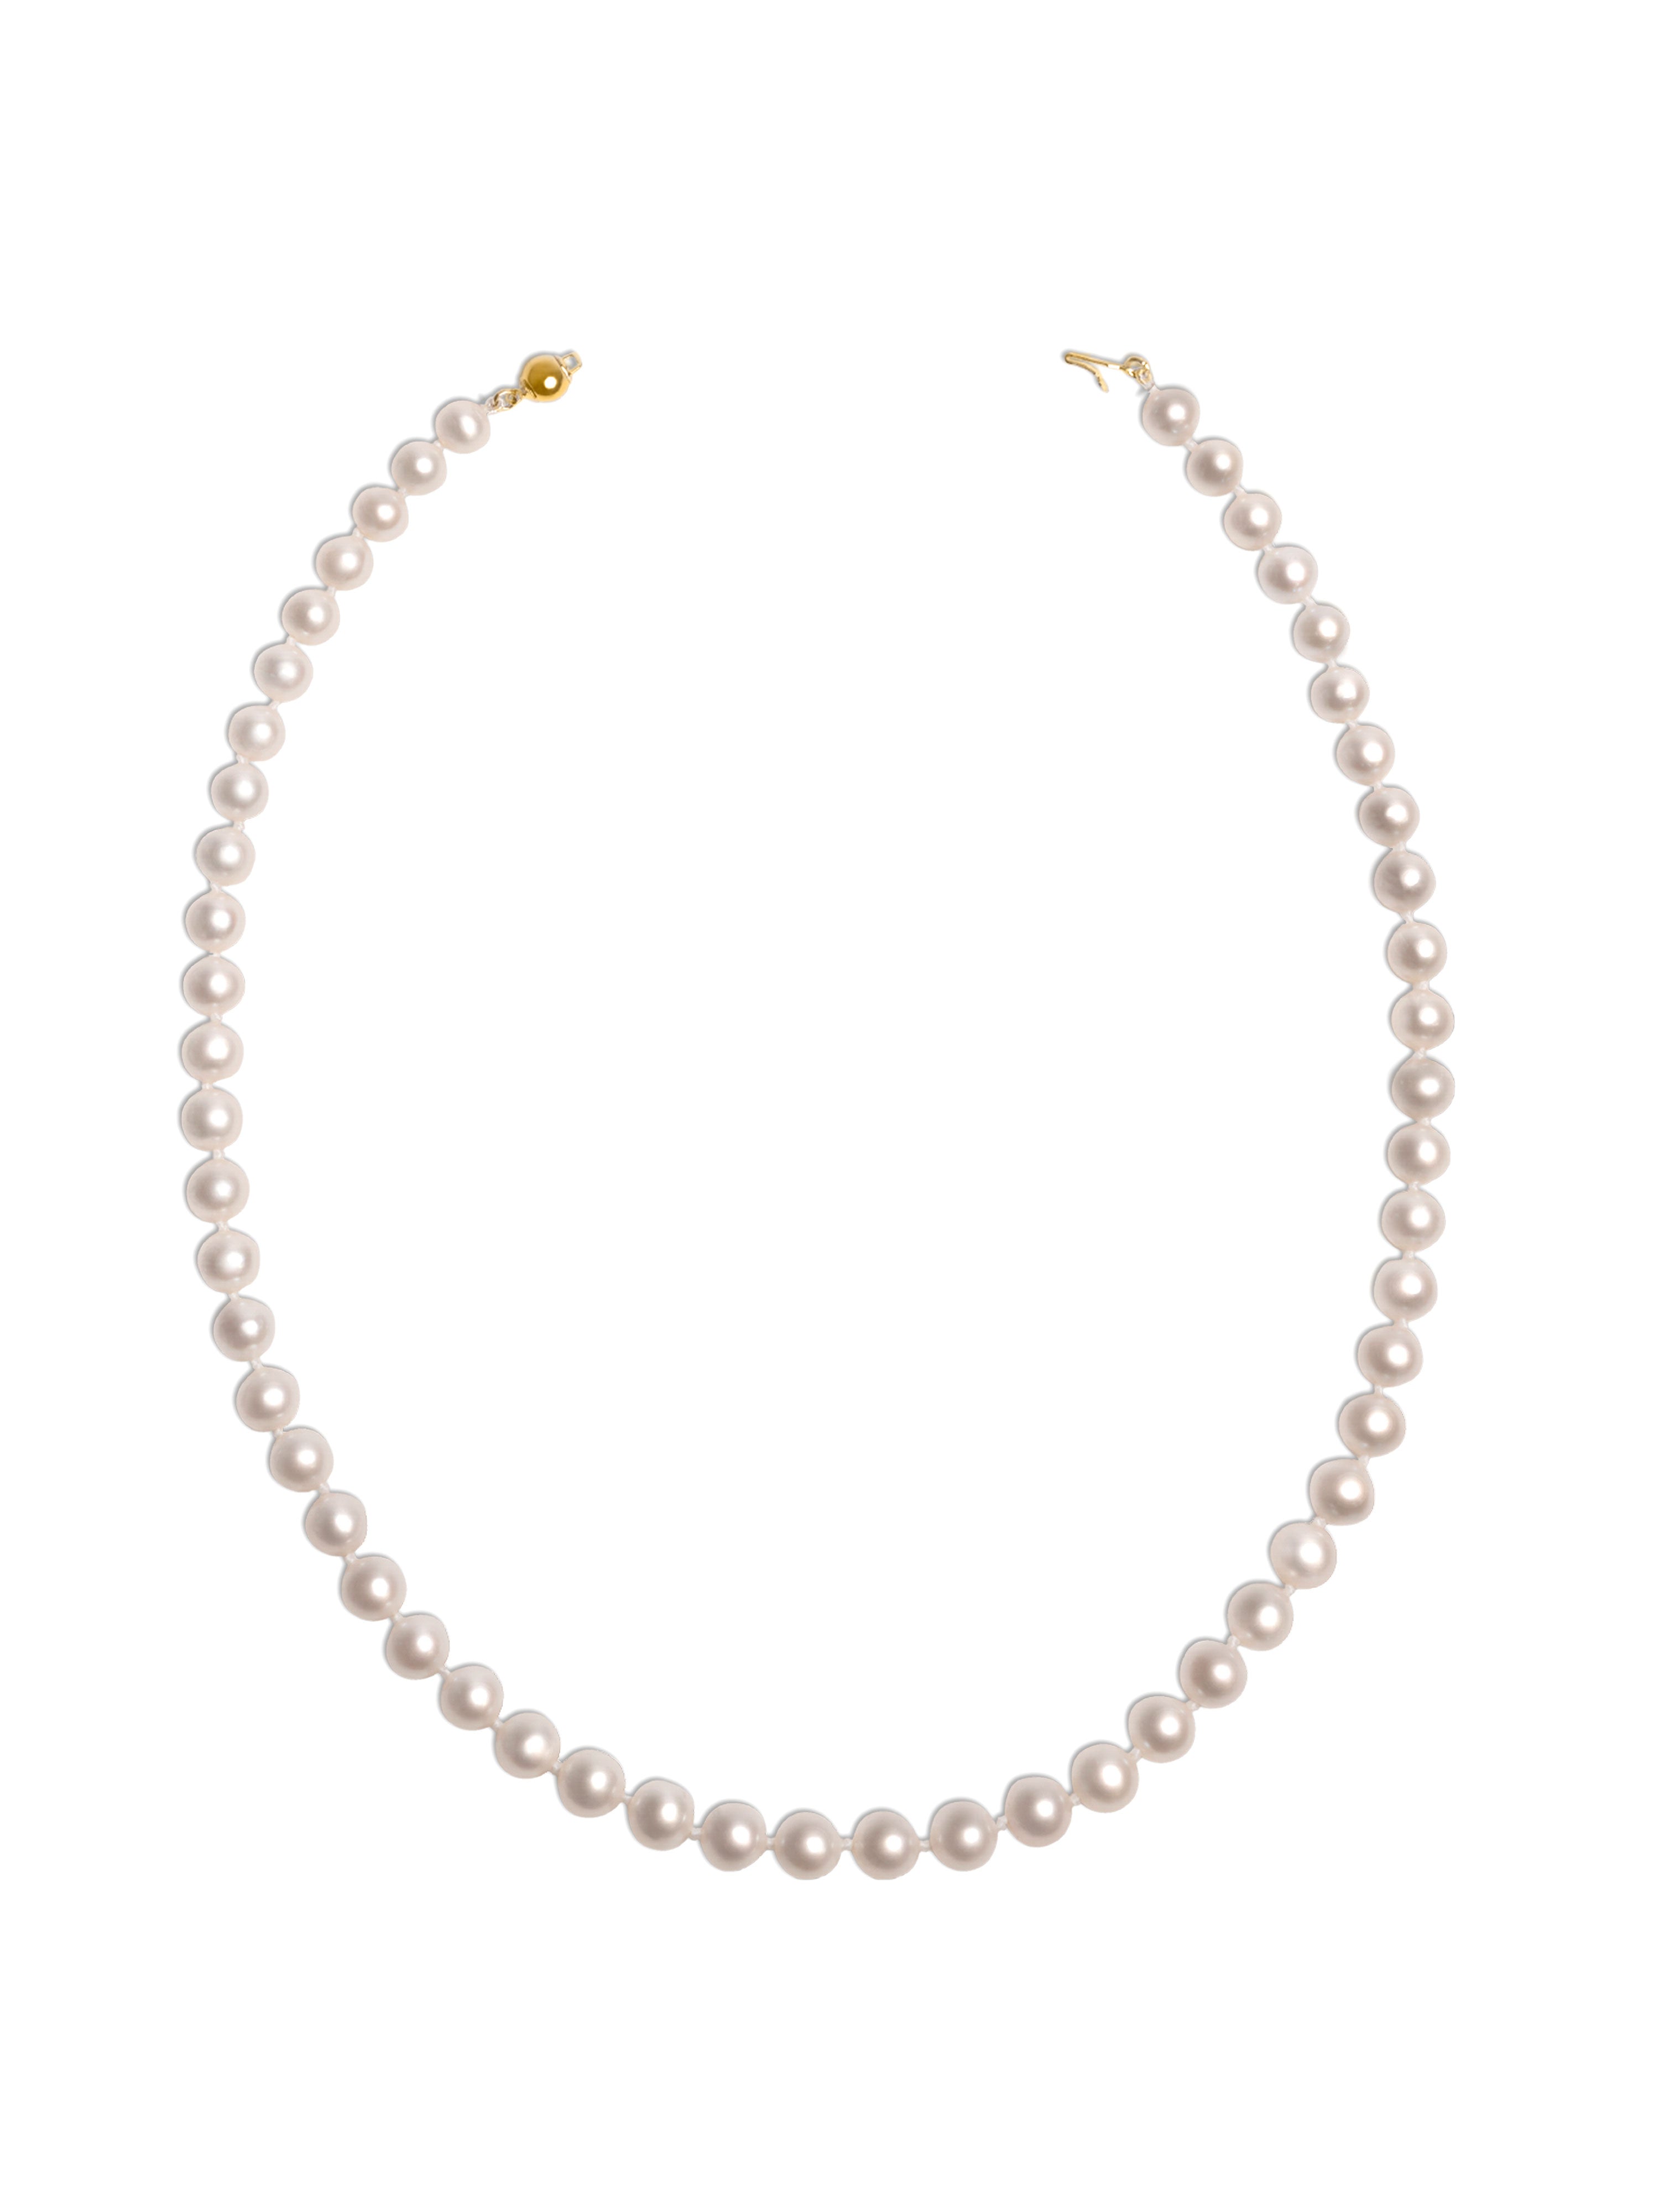 6.5-7.5mm AA+ Freshwater Cultured Pearl Necklace, 90cm long | 18K Gold